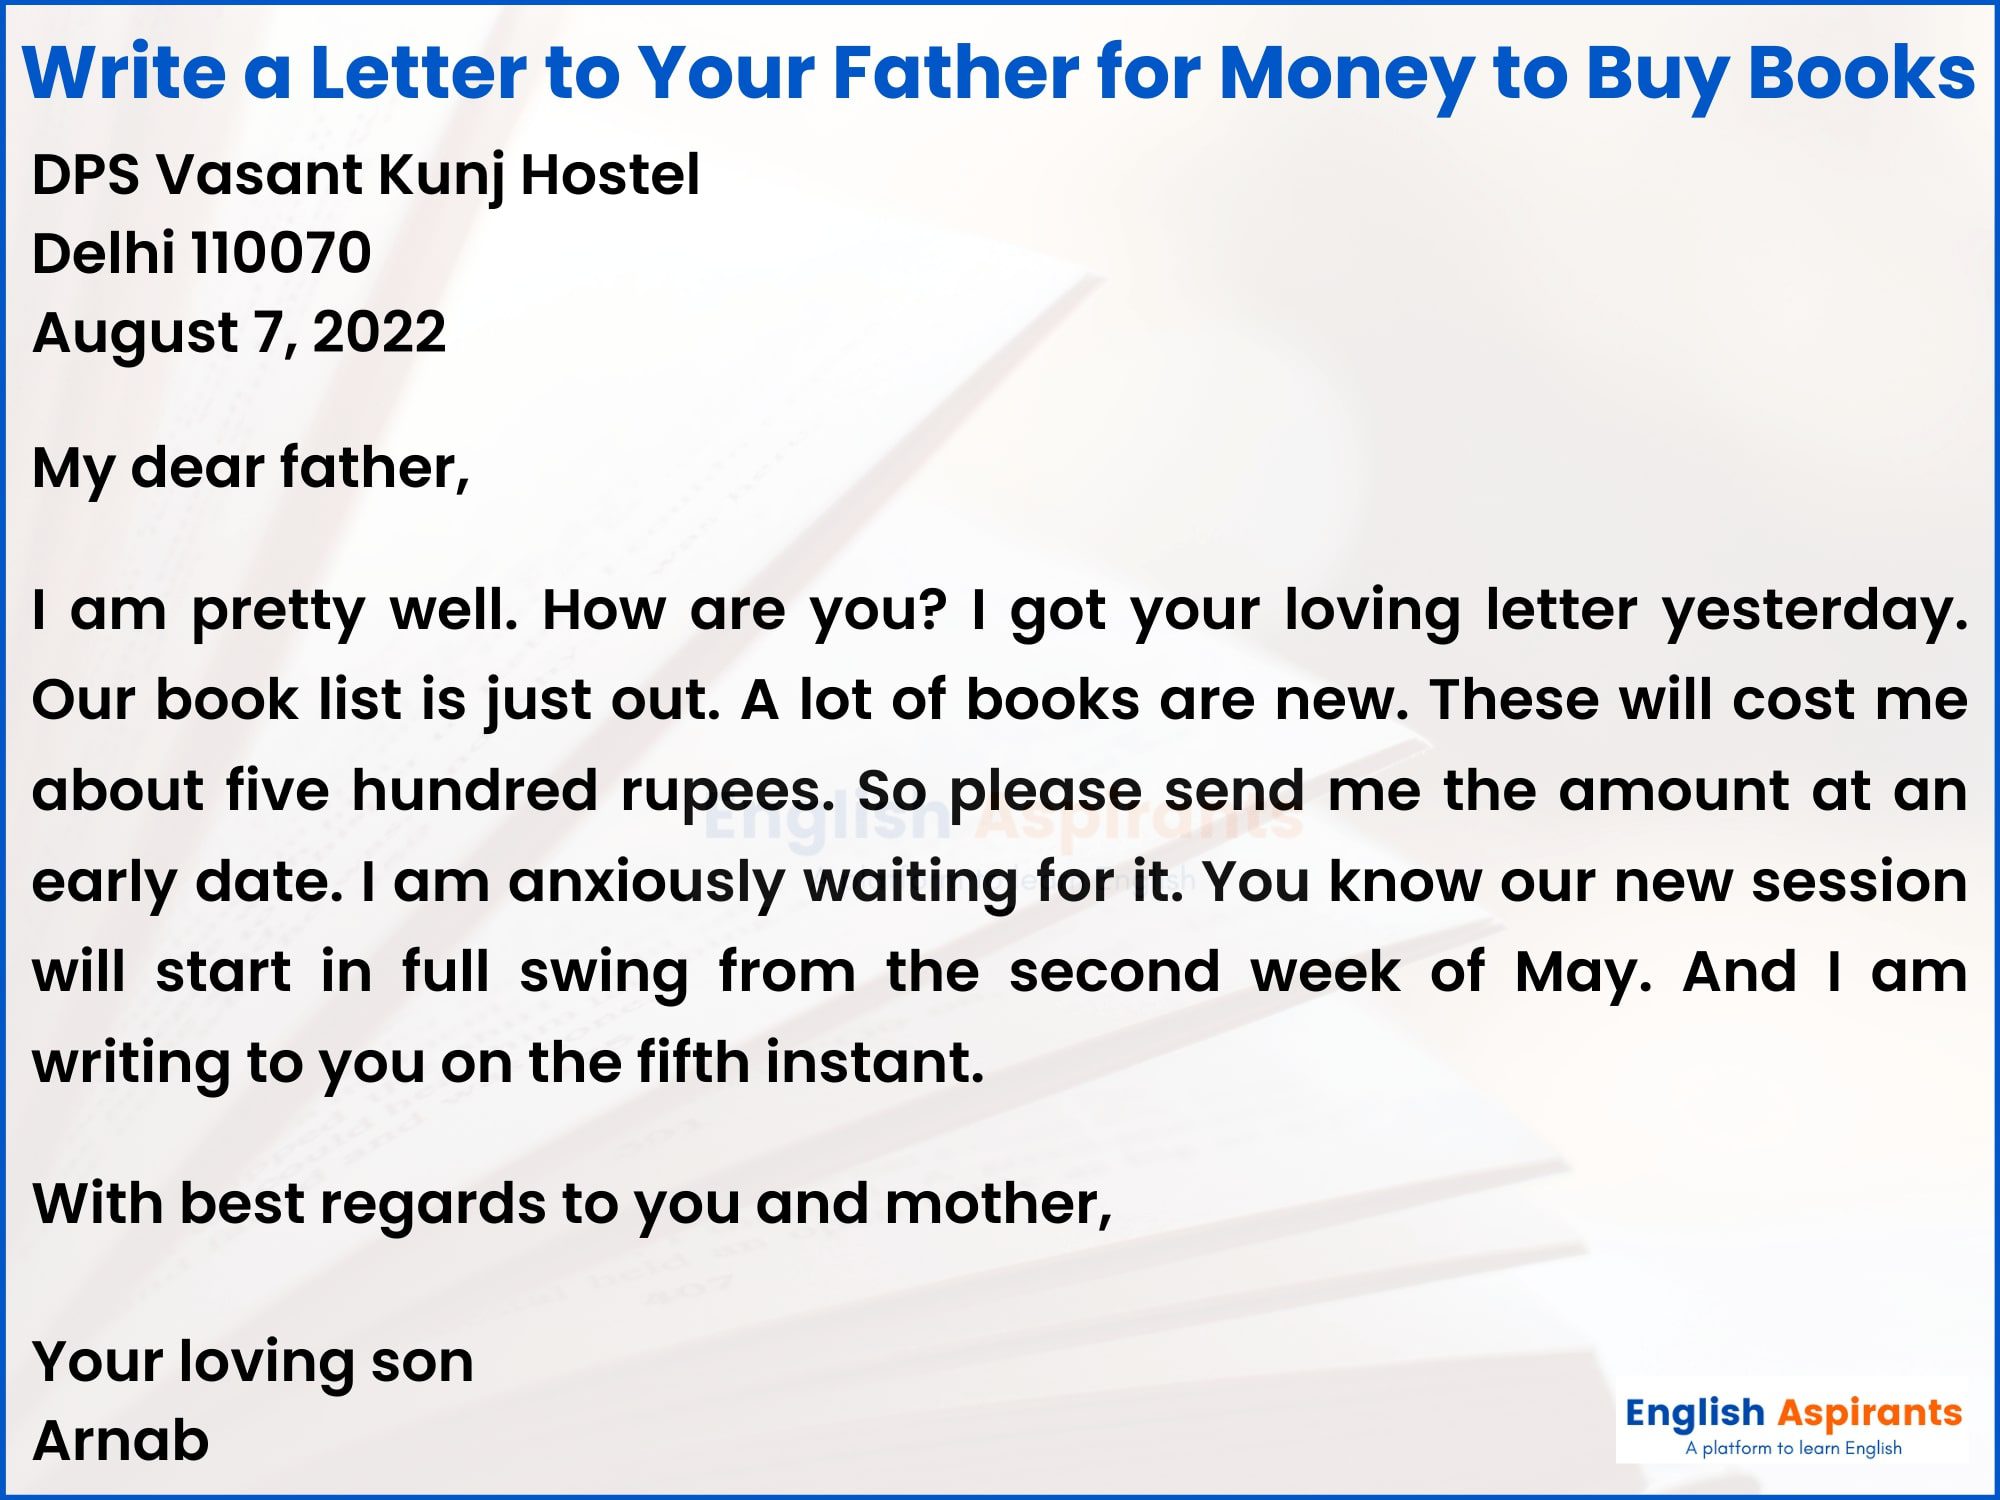 Write a Letter to Your Father for Money to Buy Books